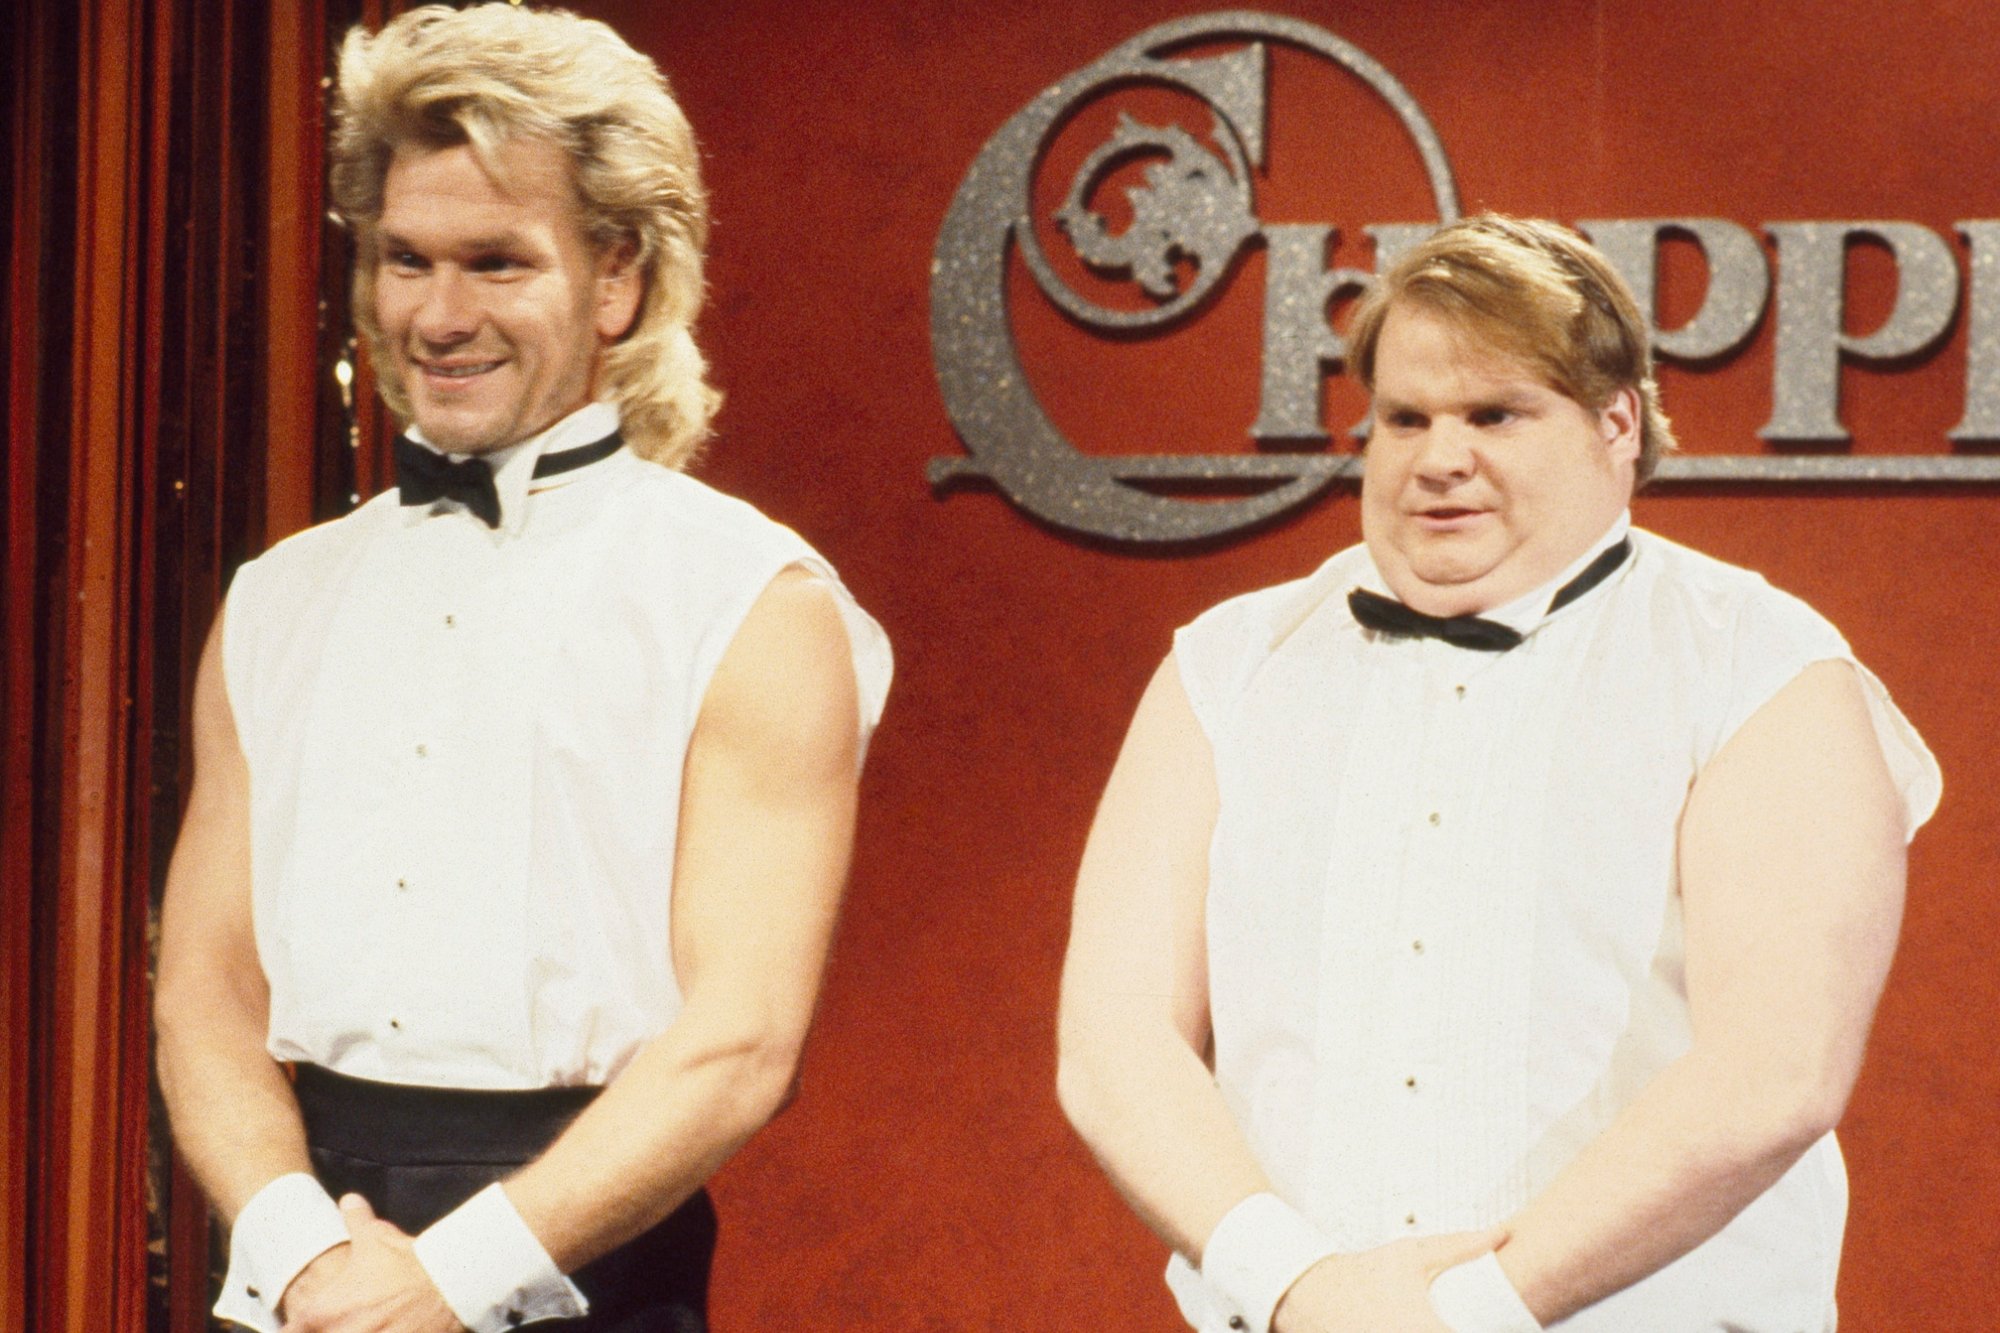 'Saturday Night Live' Patrick Swayze as Adrian, Chris Farley as Barney in 'Chippendales' sketch, wearing white shirts with a black bow tie and black pants.